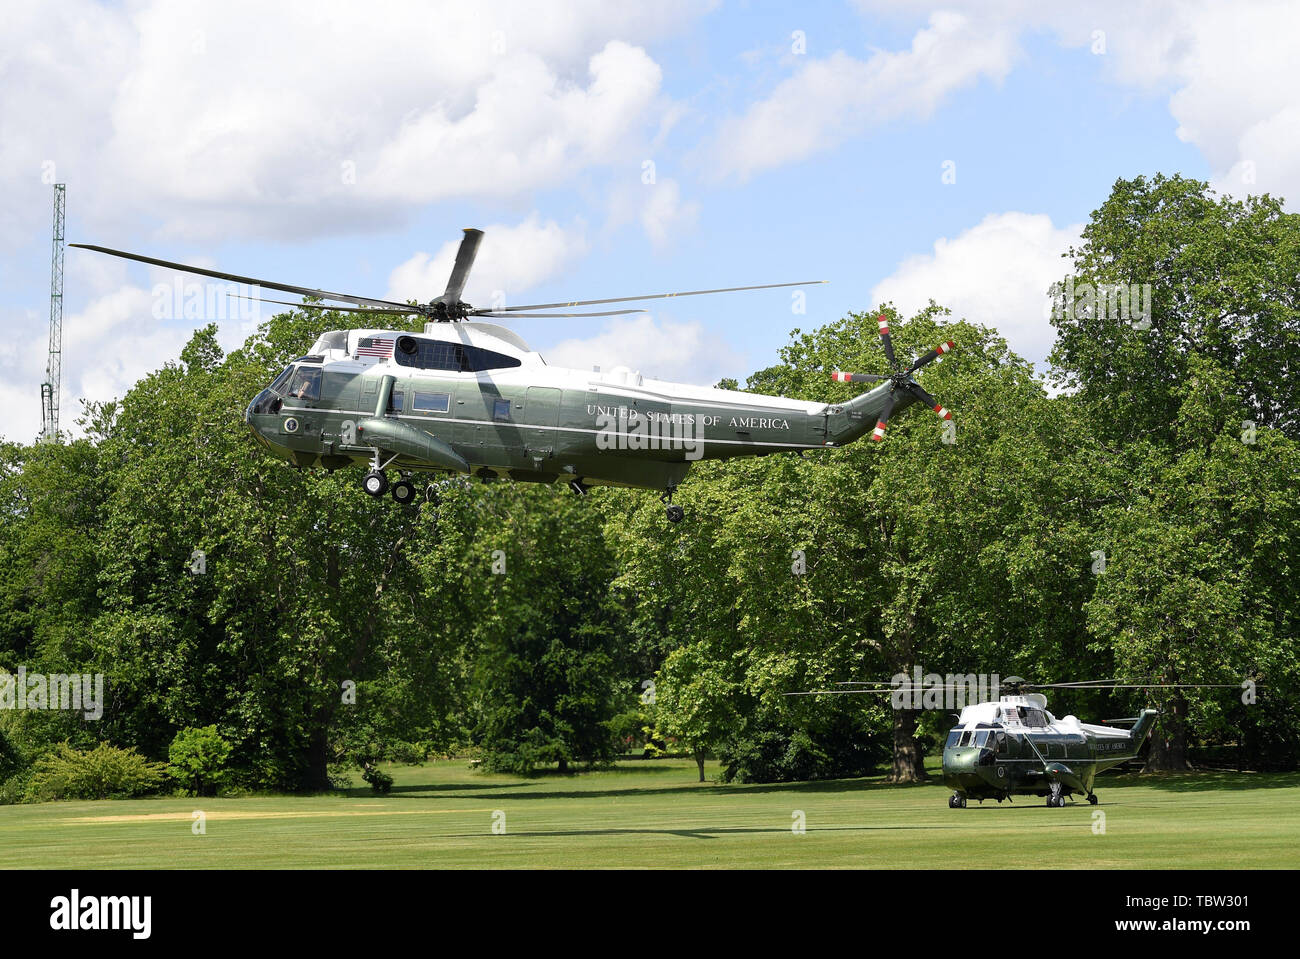 US President Donald Trump and his wife Melania arrive in Marine One at Buckingham Palace, in London on day one of his three day state visit to the UK. Stock Photo